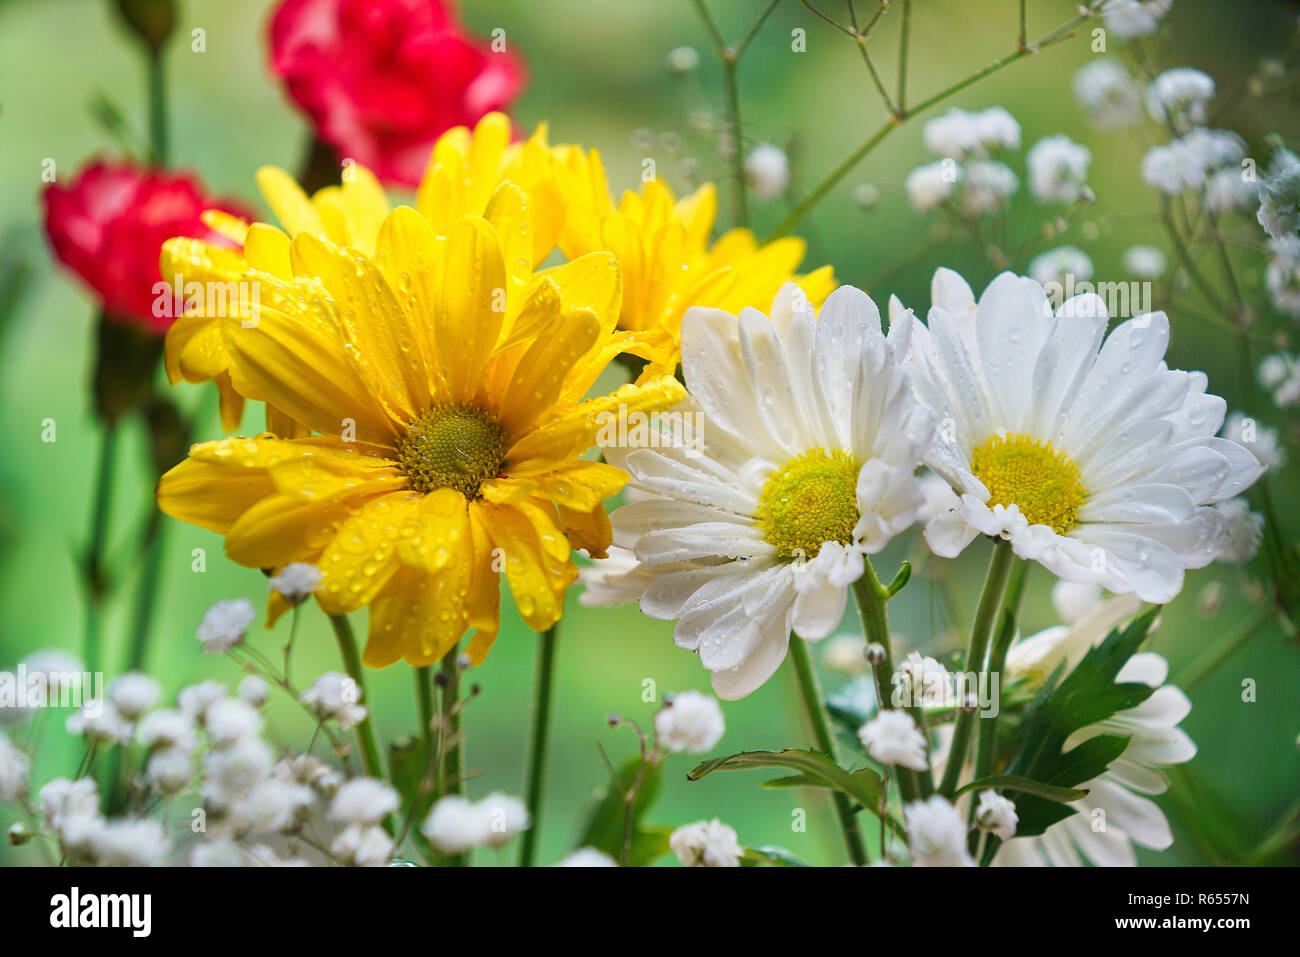 Montreal,Canada,3 December,2018.Daisy flowers on a spring day.Credit:Mario Beauregard/Alamy Live News Stock Photo